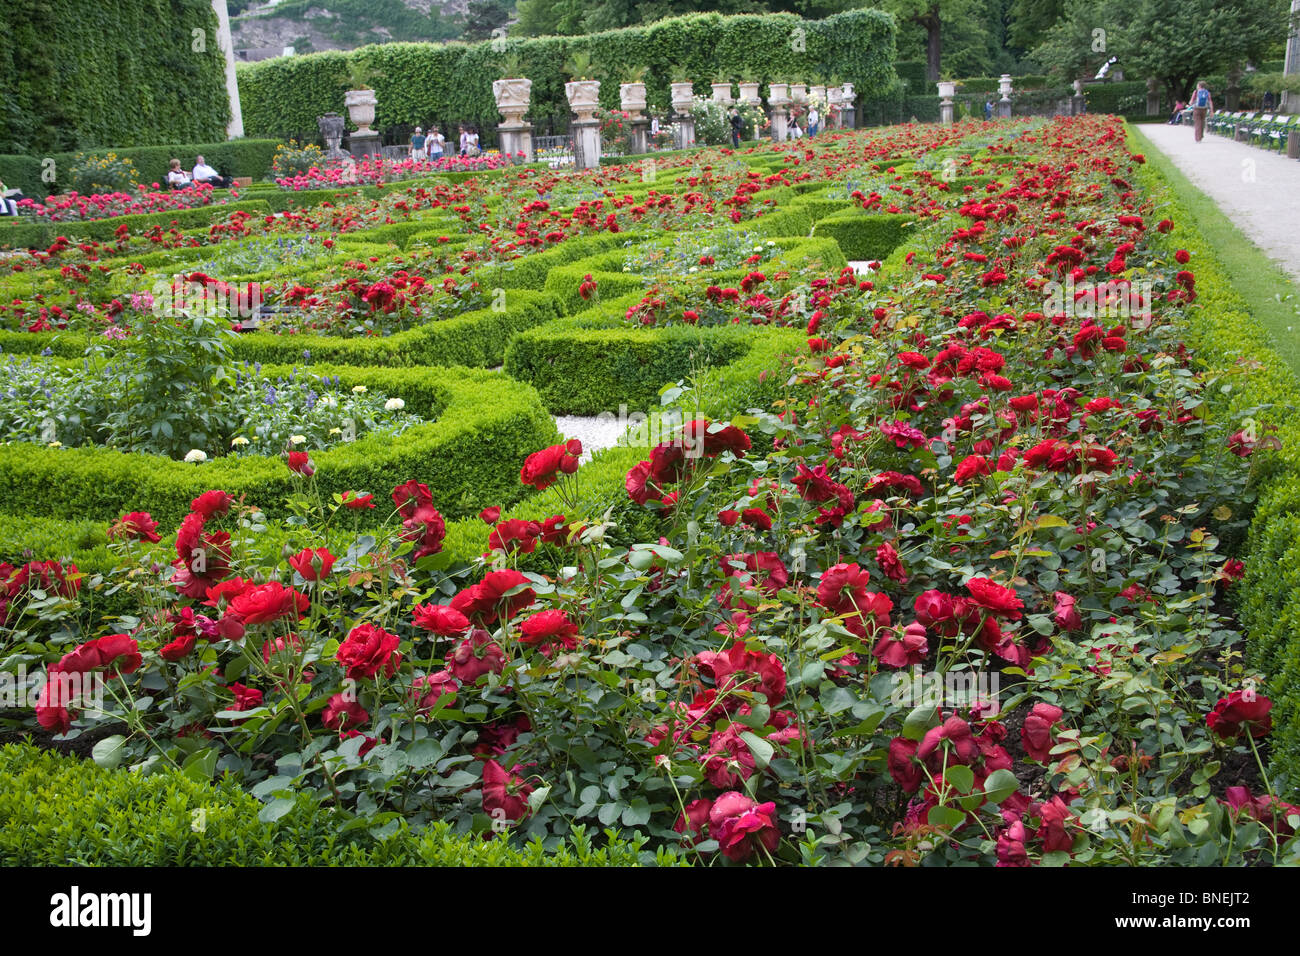 Rose Beds High Resolution Stock Photography and Images - Alamy